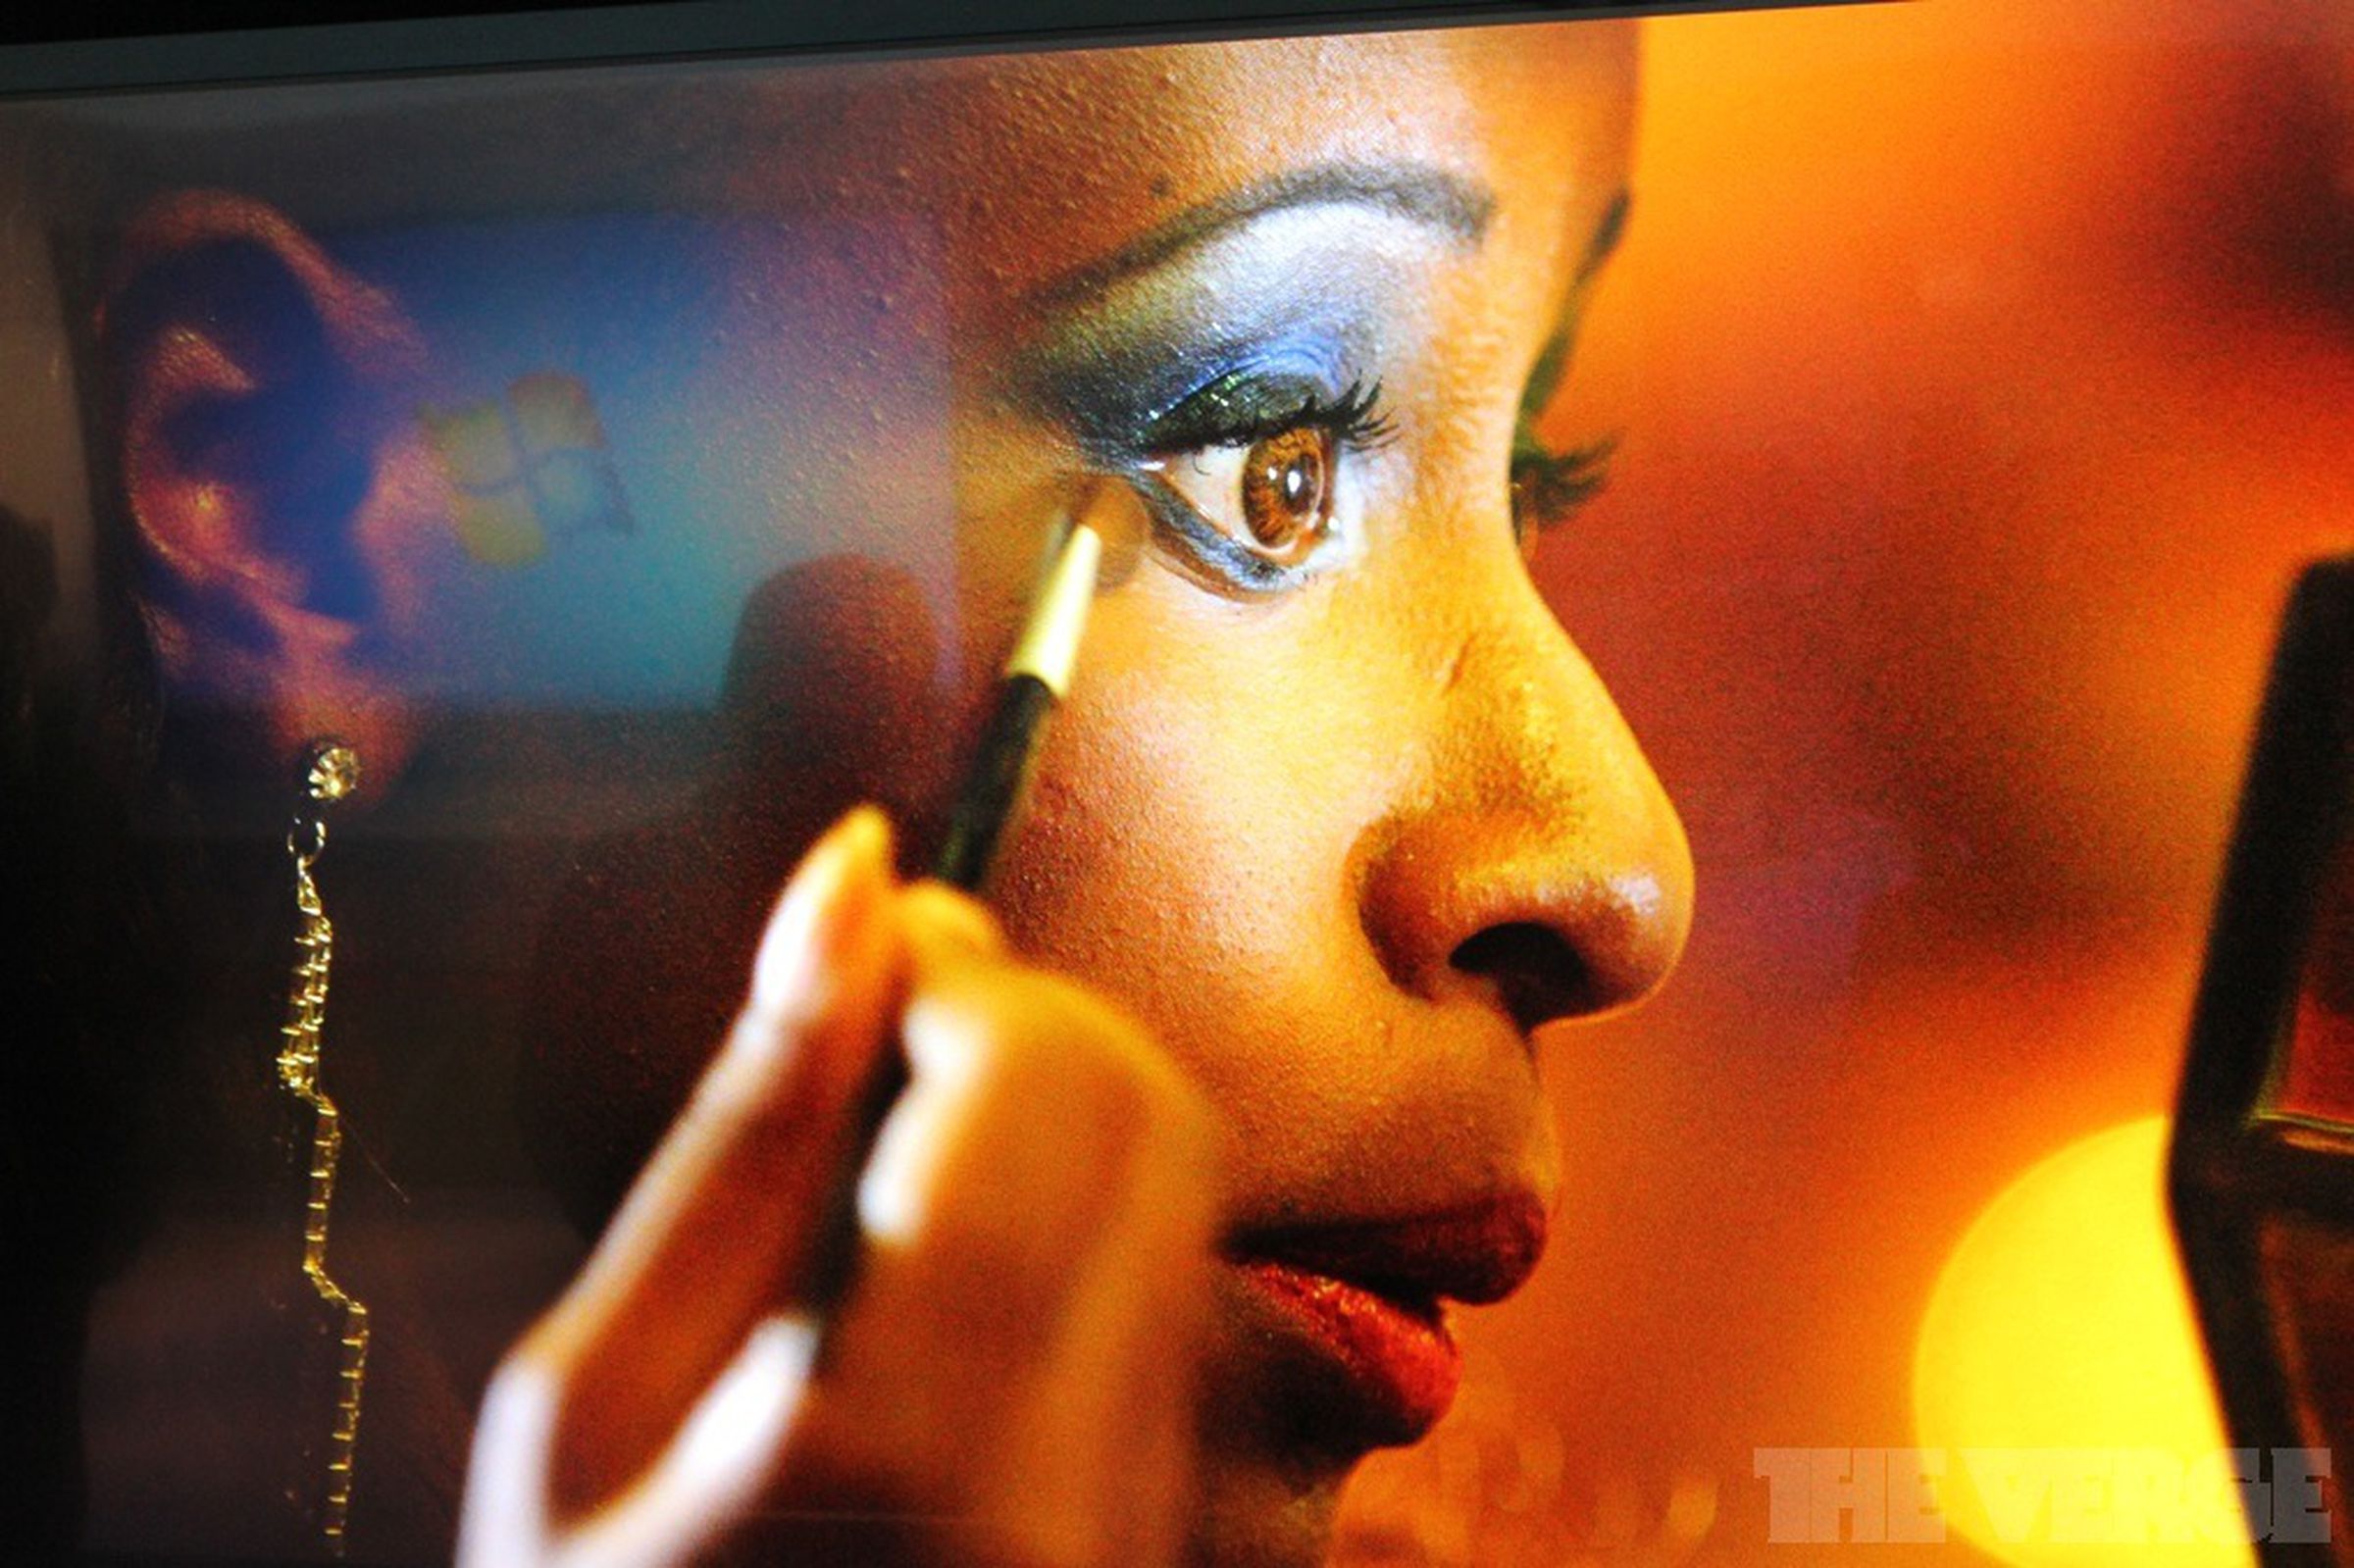 More hands-on photos with the Sony 4K OLED TV